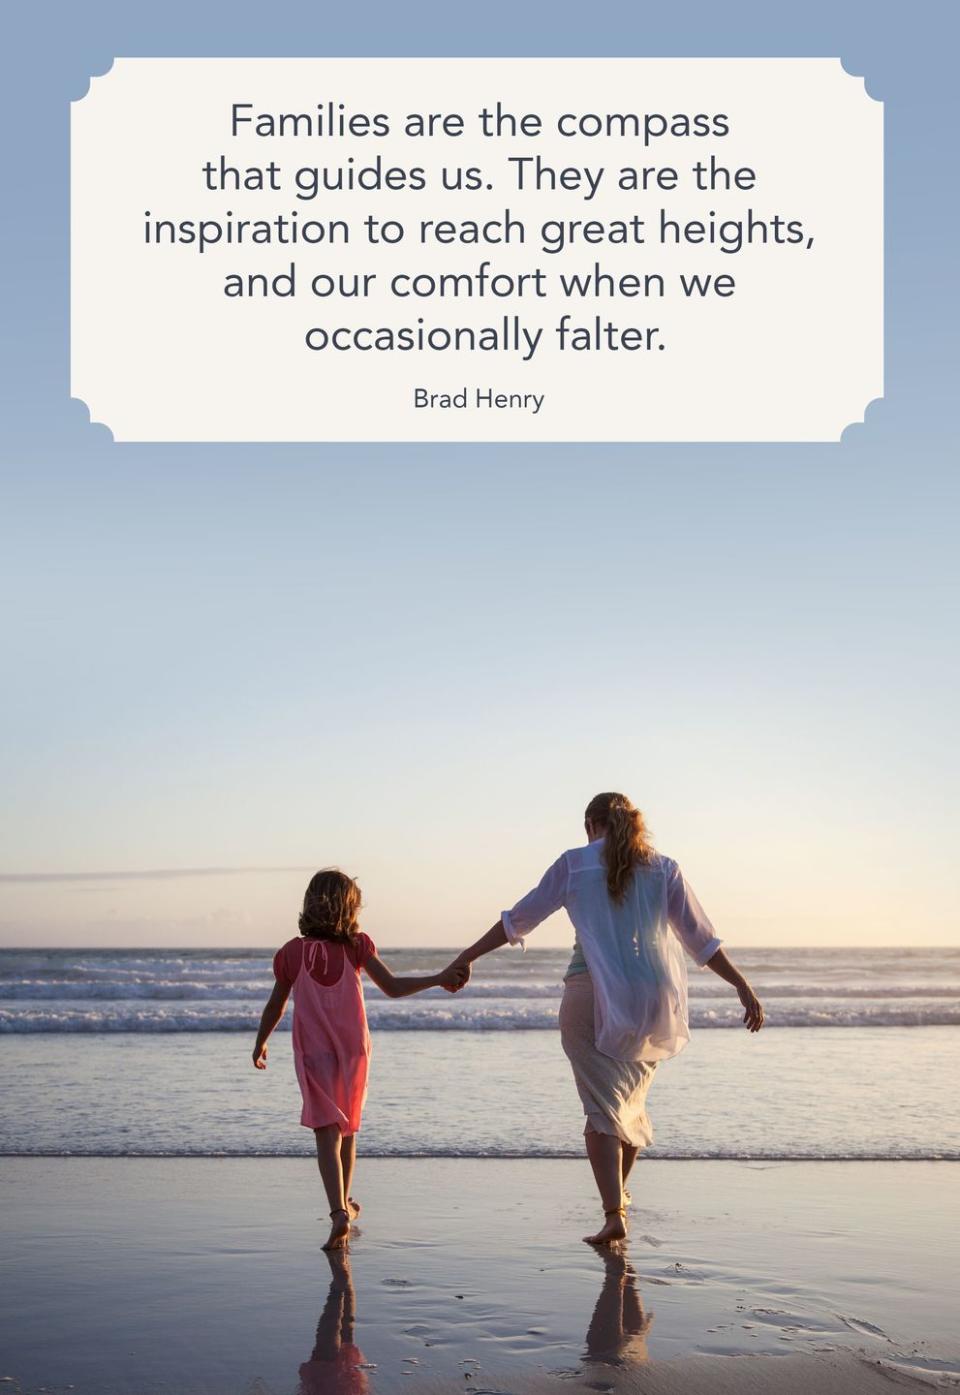 <p>"Families are the compass that guides us. They are the inspiration to reach great heights, and our comfort when we occasionally falter."</p>